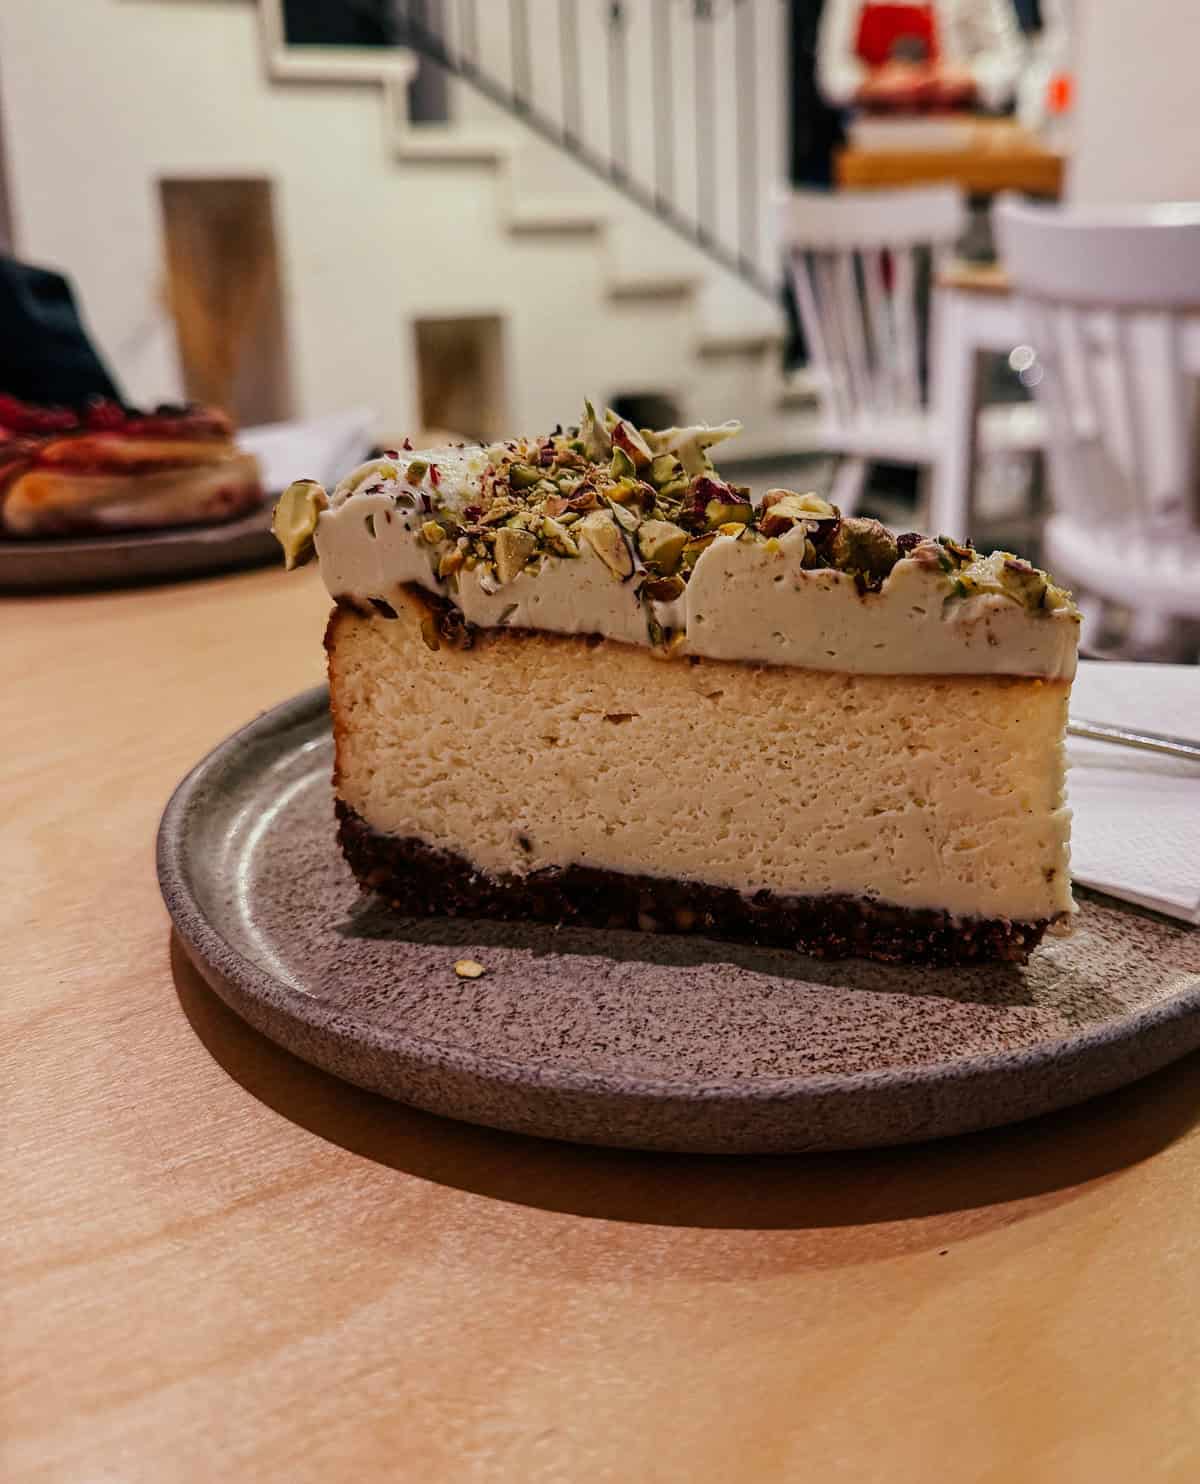 A slice of cheesecake topped with chopped pistachios served on a gray plate, with a staircase and dining area in the background.